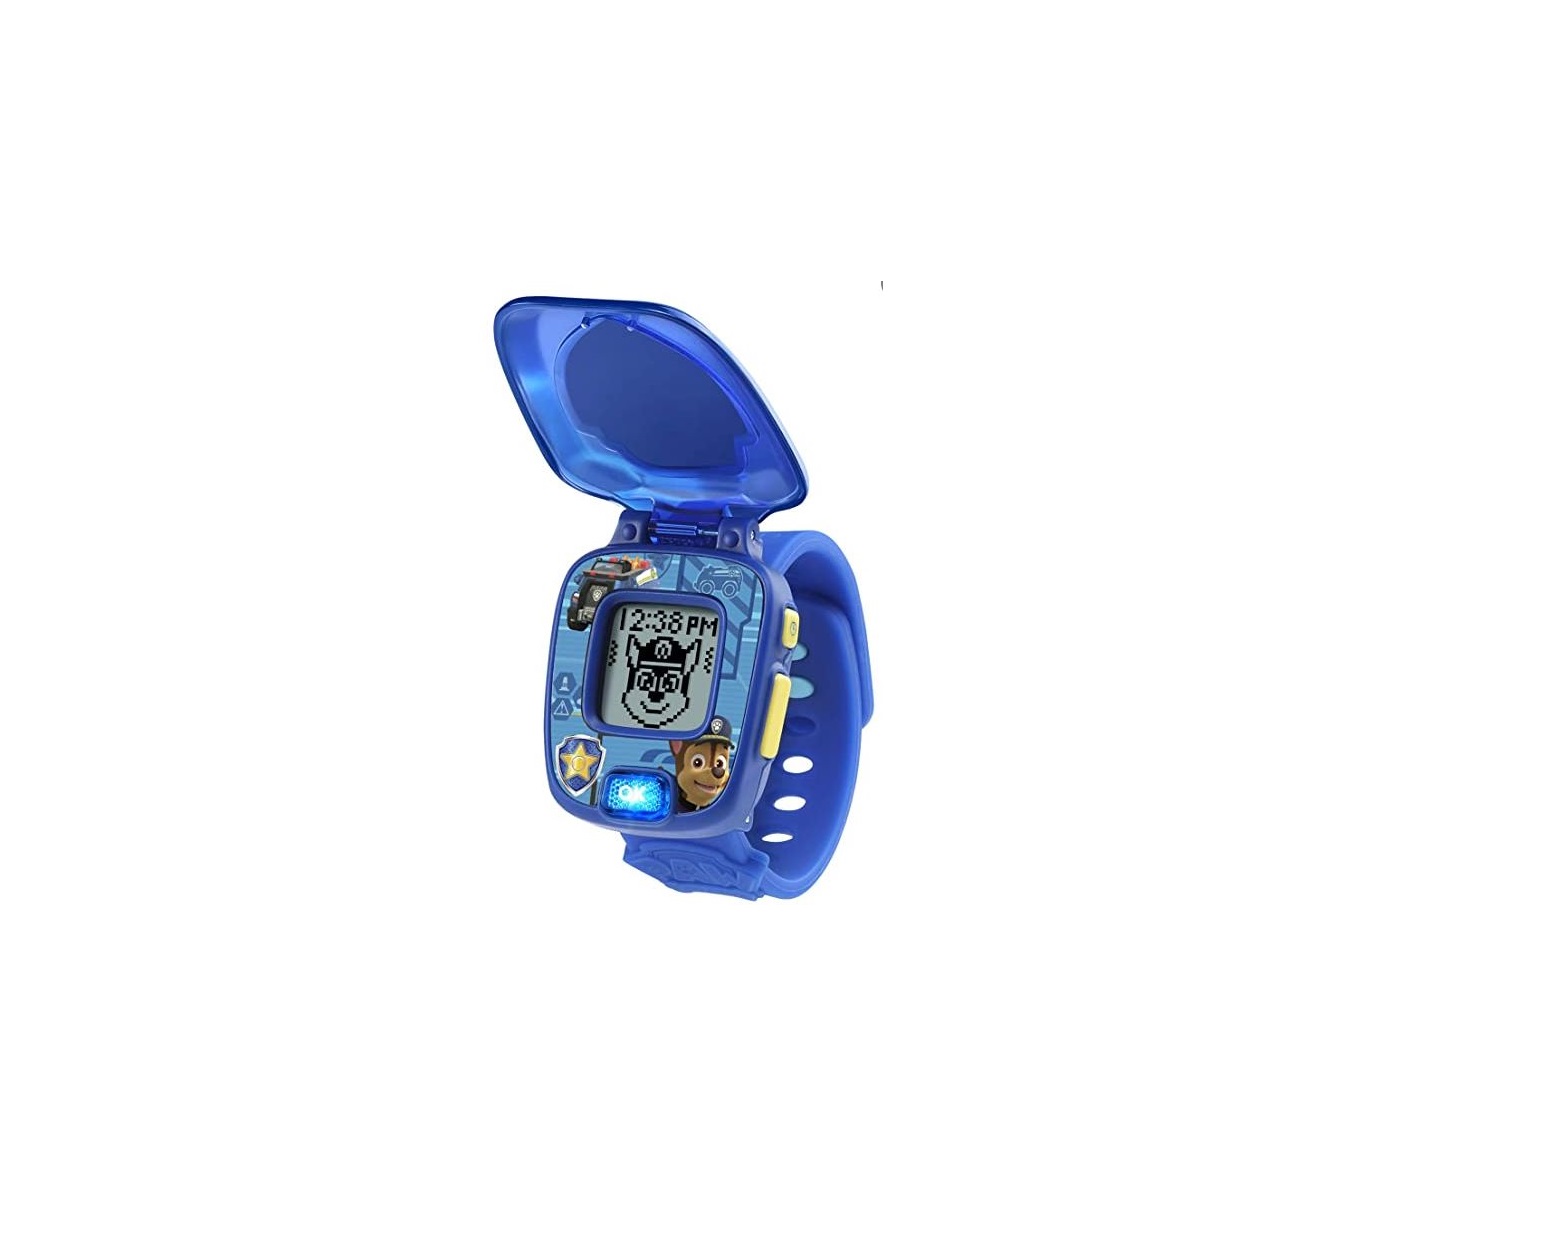 vtech 80-525550 Paw Patrol: The Movie: Learning Watch User Guide